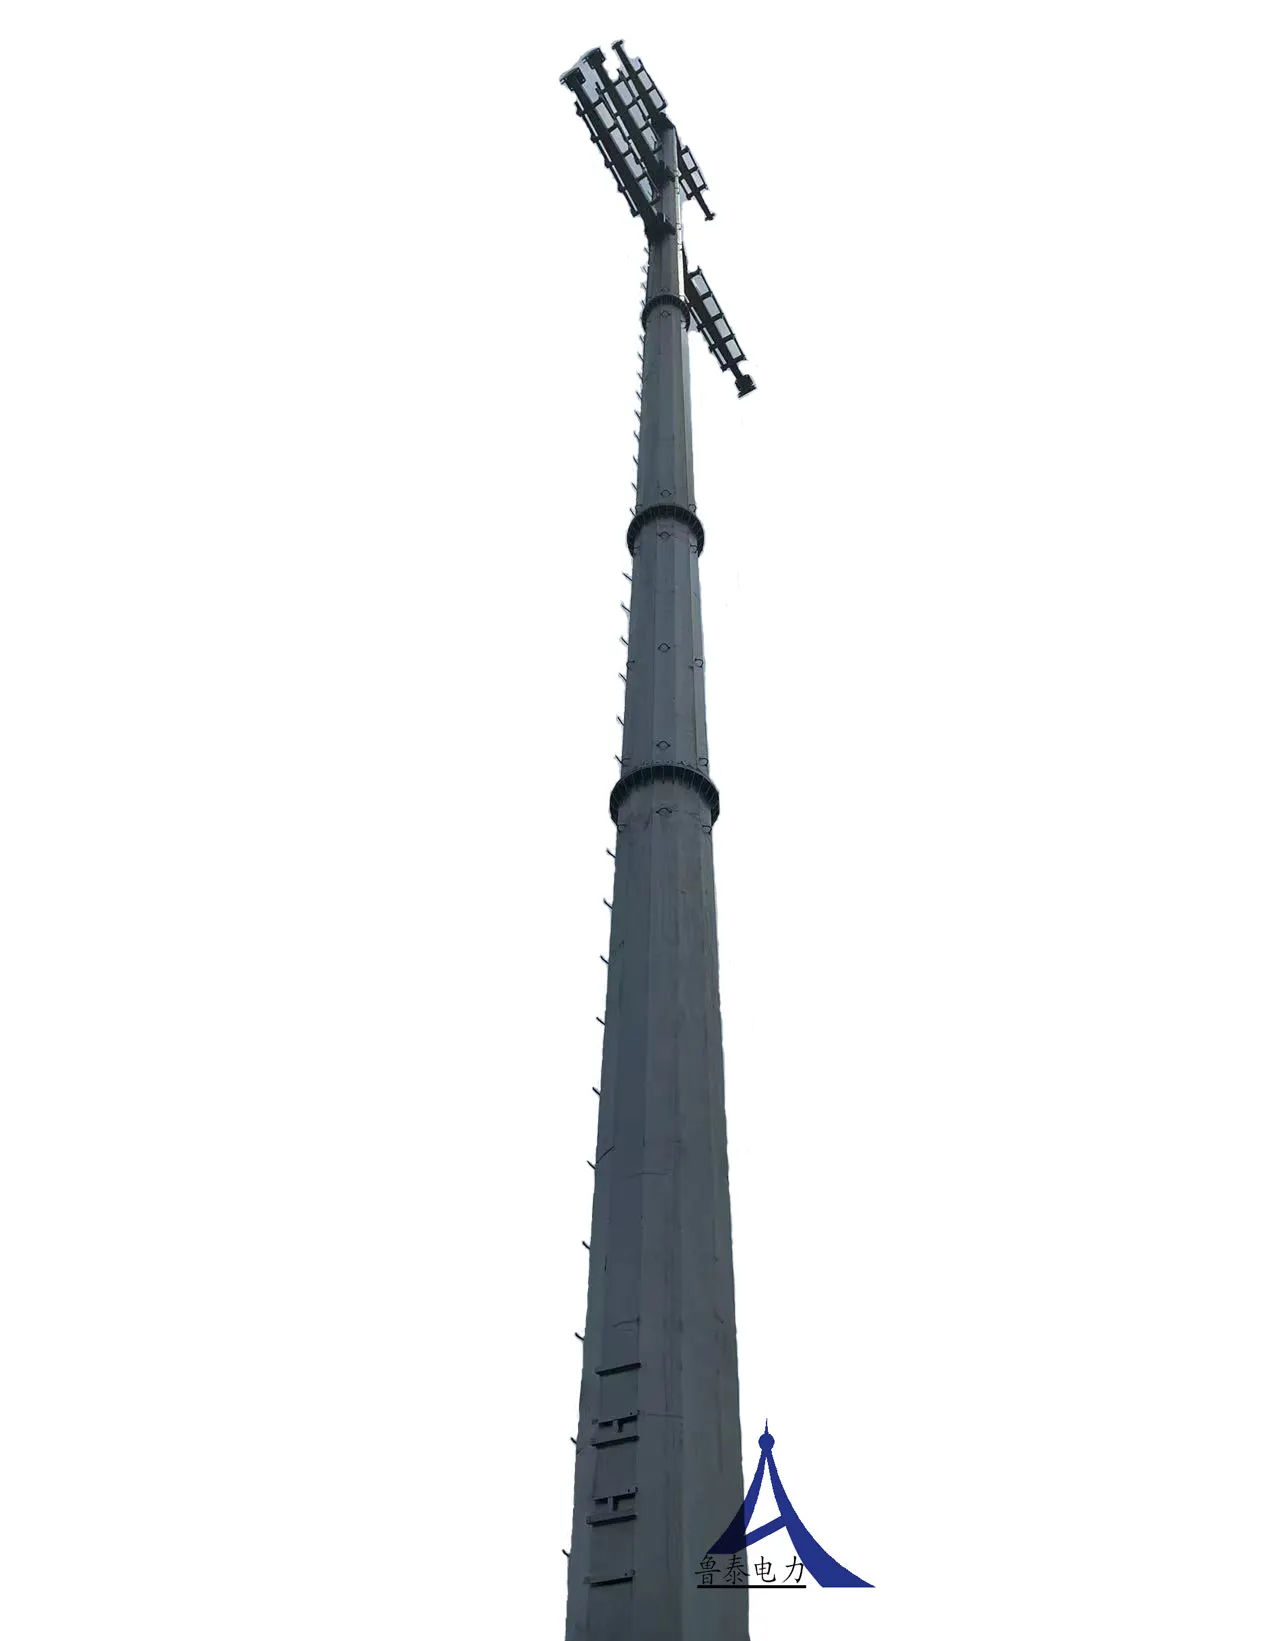 Hot-selling electric pole galvanized iron tower is used for transmission line communication with good quality and good price